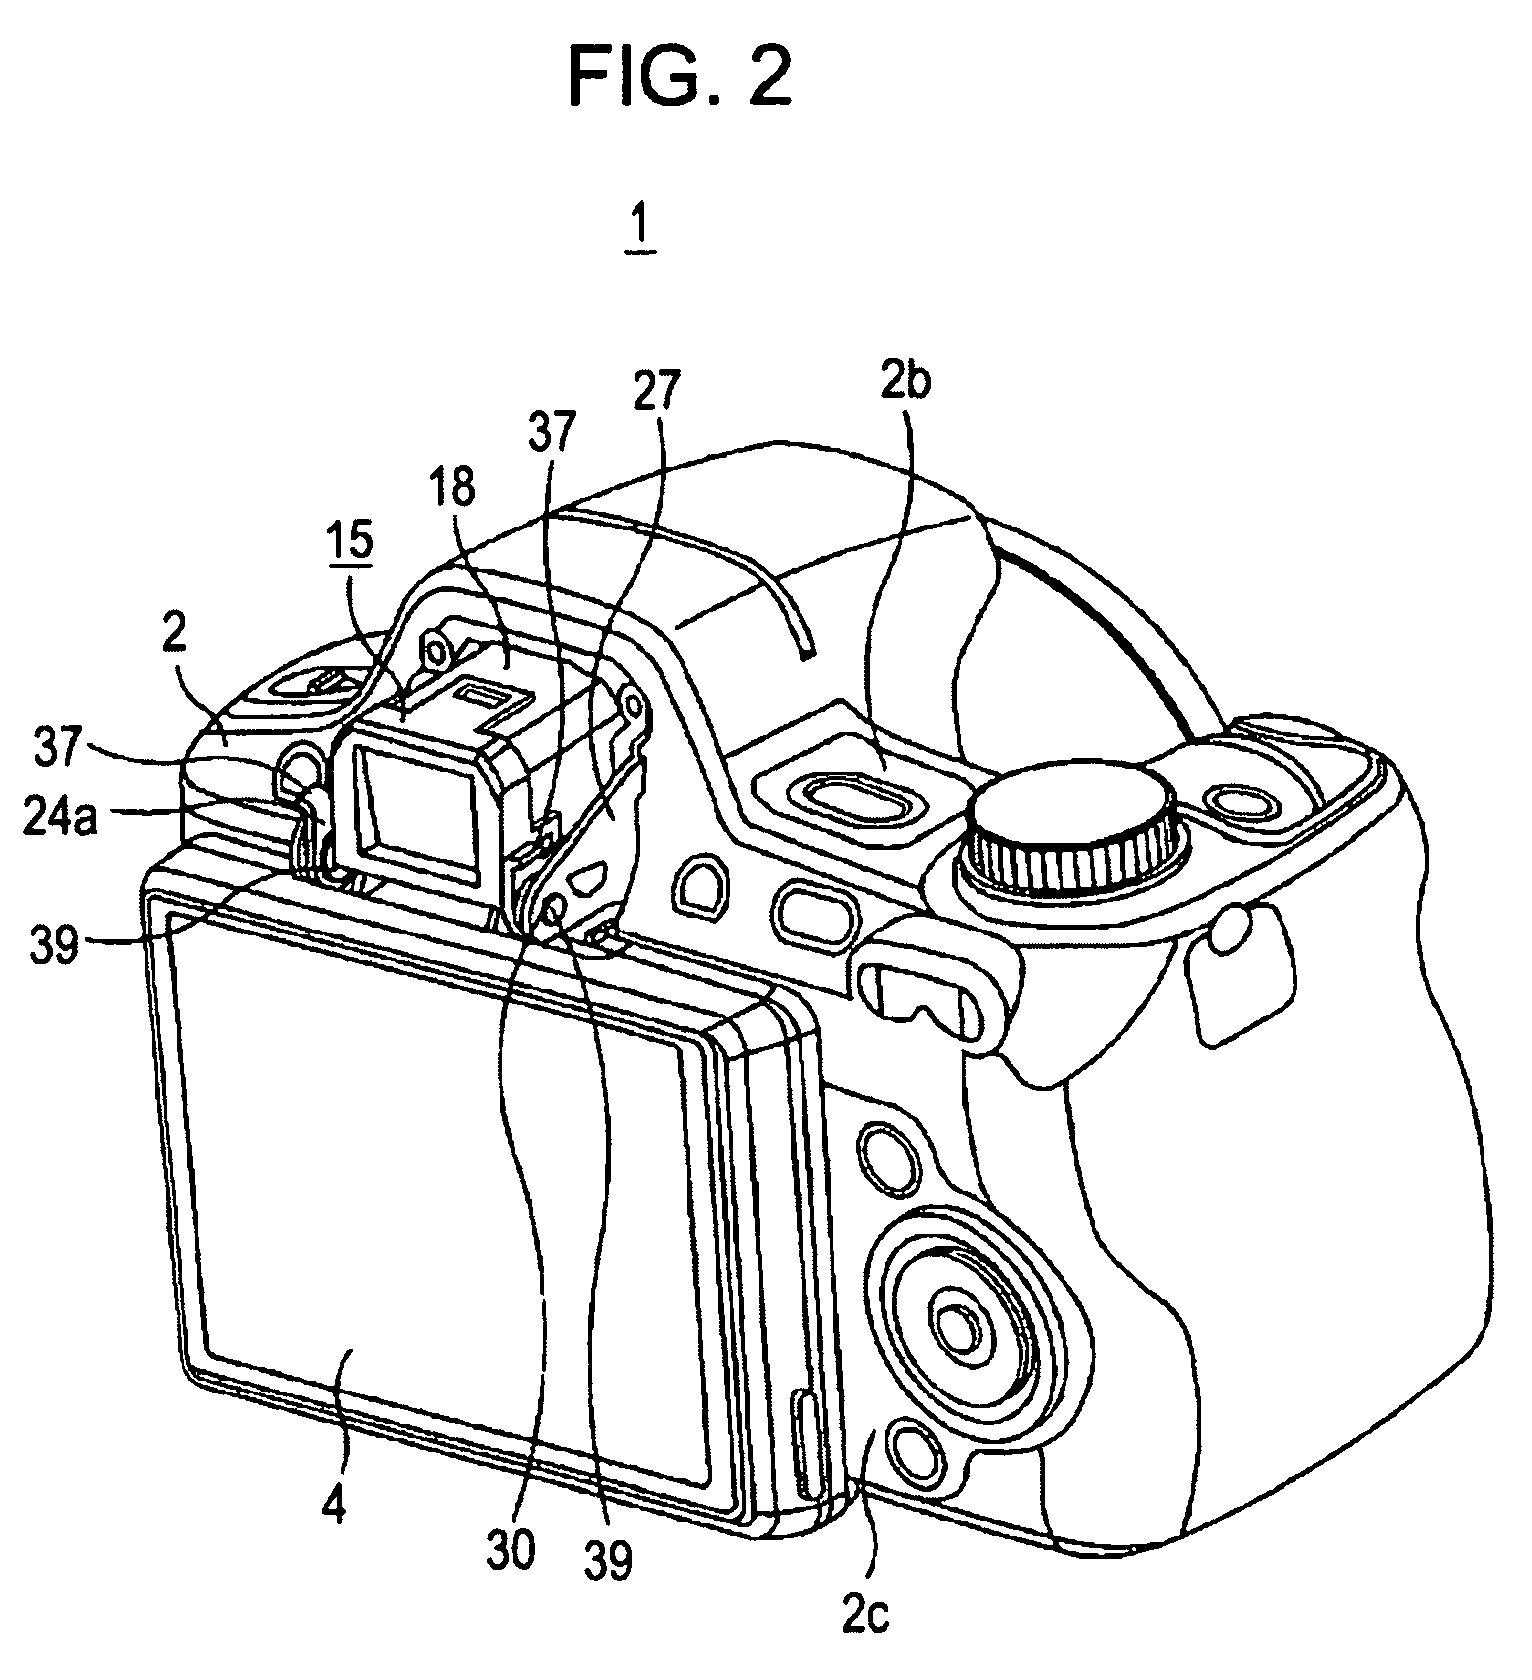 Imaging apparatus with a rotatable monitor